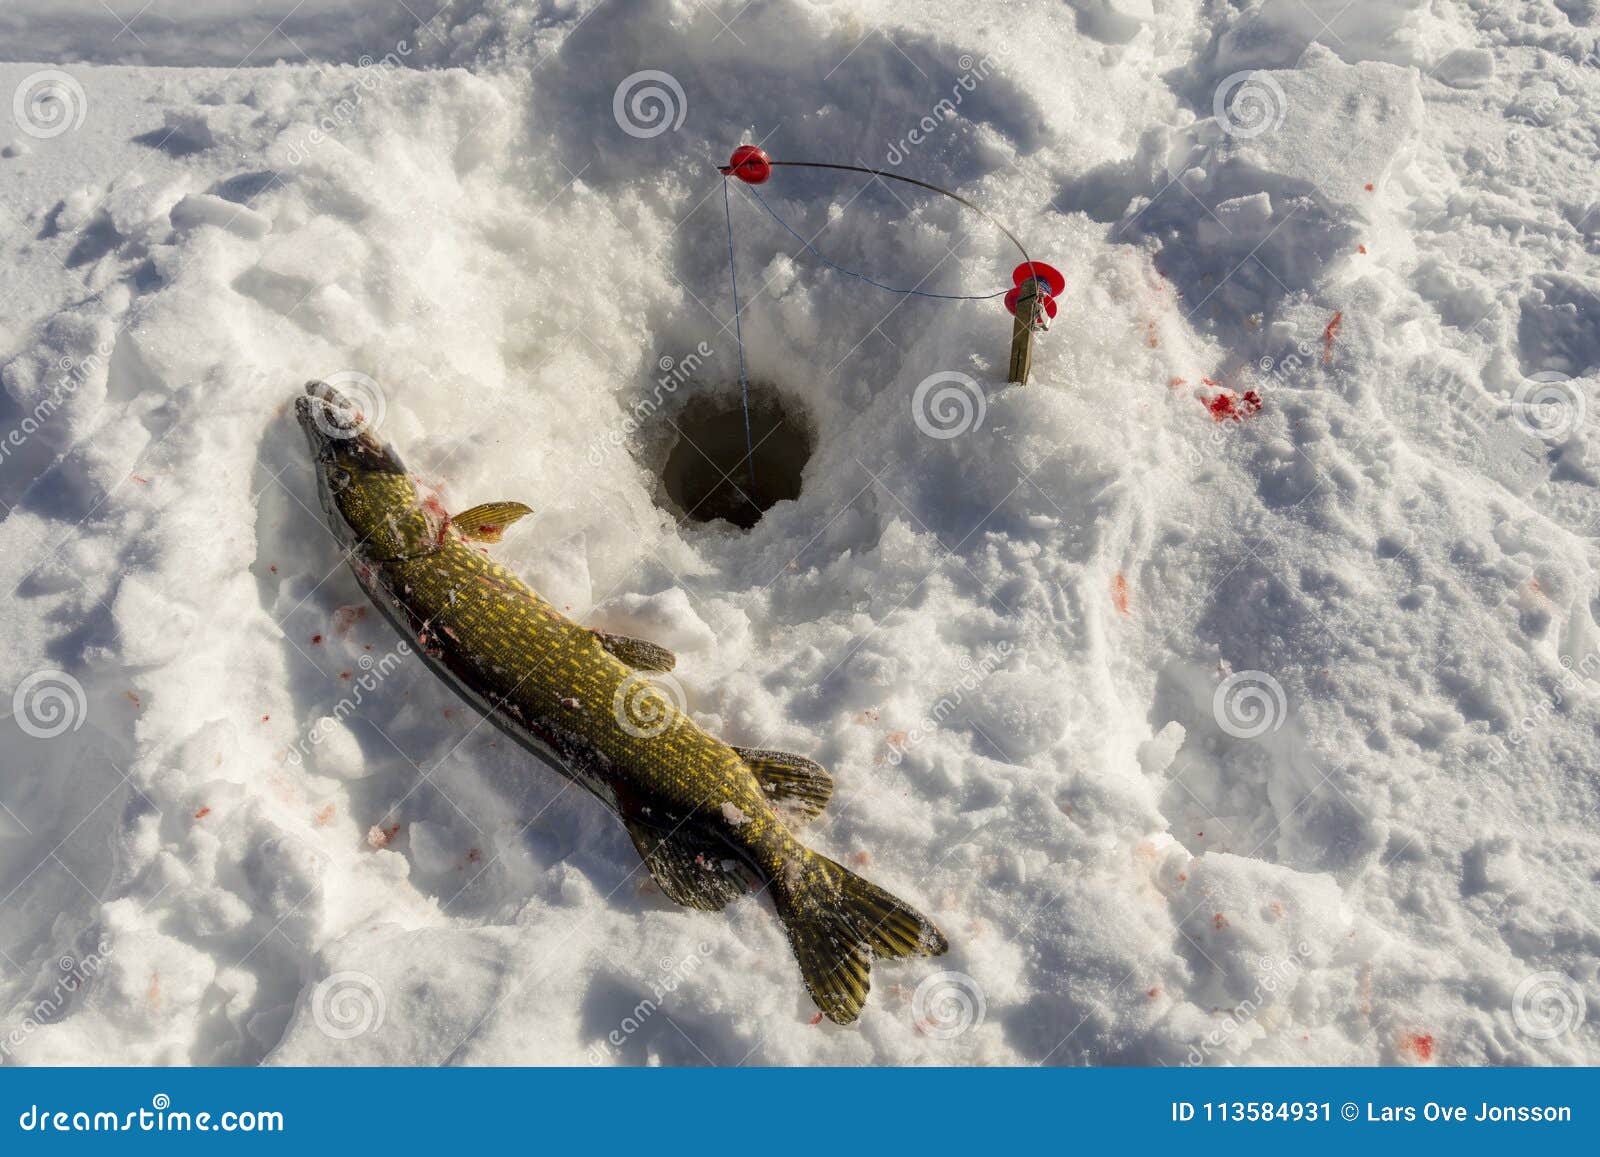 Hole in the Ice and a Pike, Near To a Special Winter Fishing Equipment Used  To Catch Pike. Stock Image - Image of tail, sport: 113584931